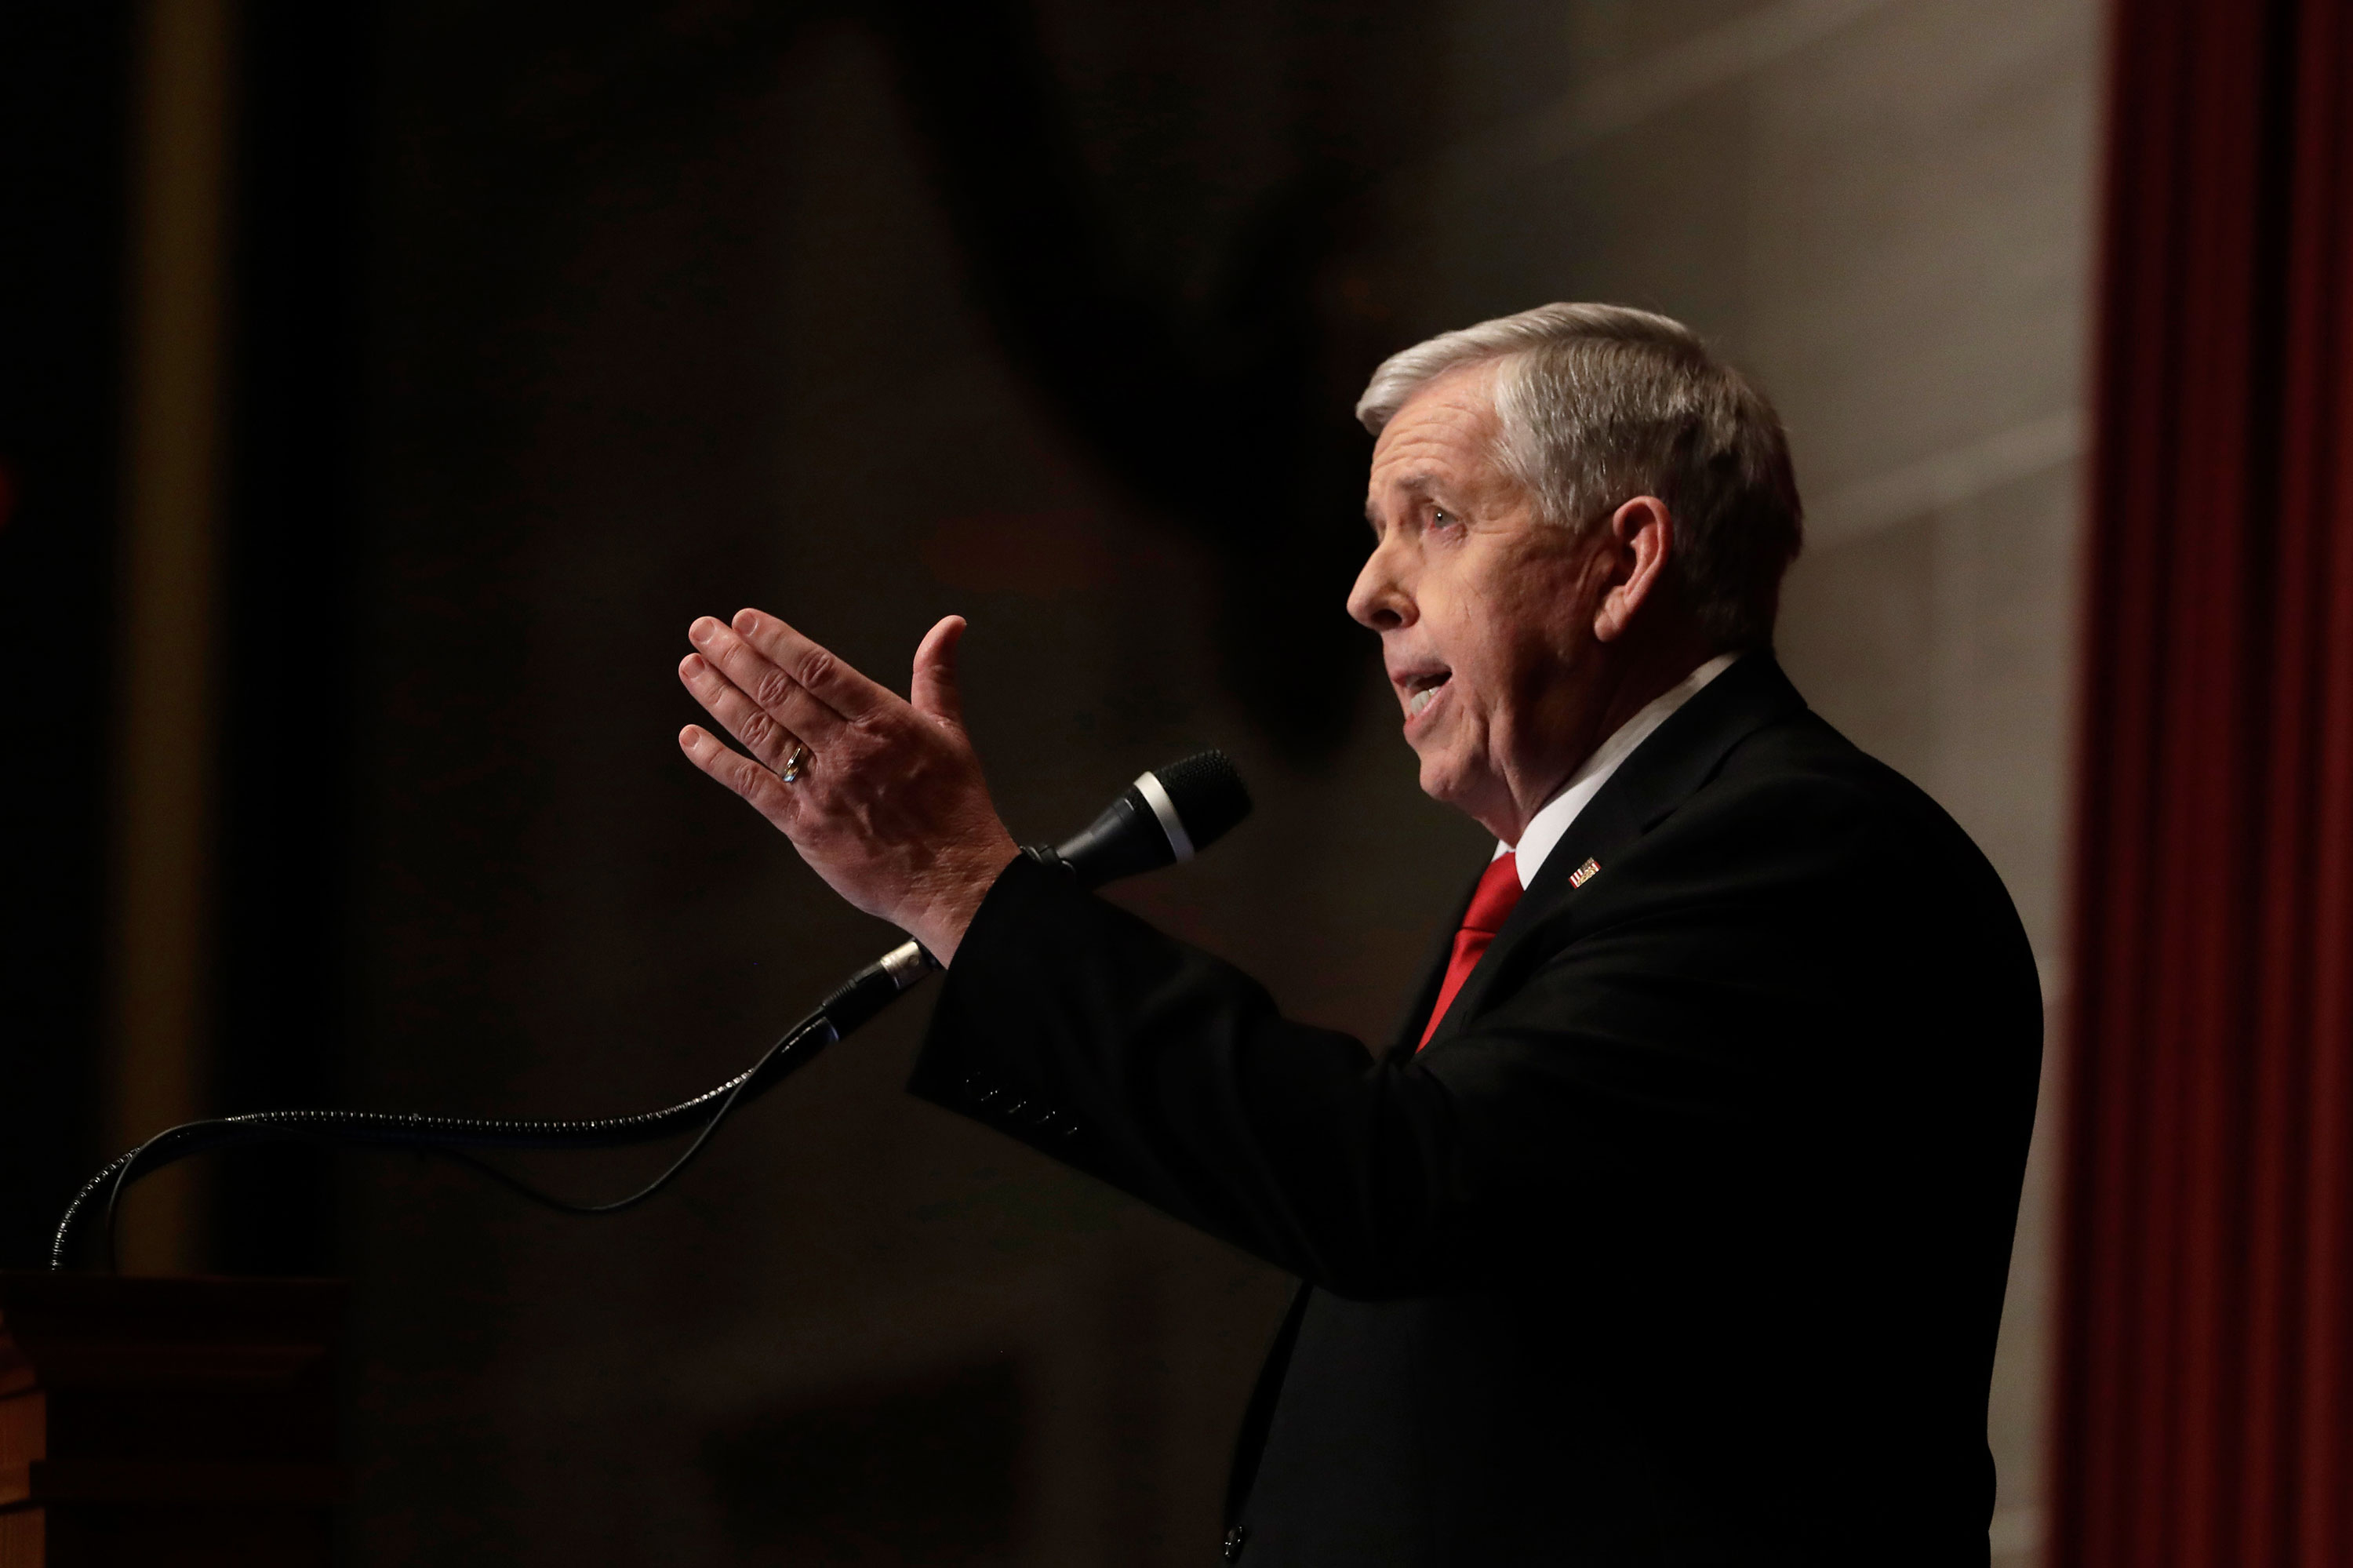 Gov. Mike Parson delivers the State of the State address on January 15 in Jefferson City, Missouri.